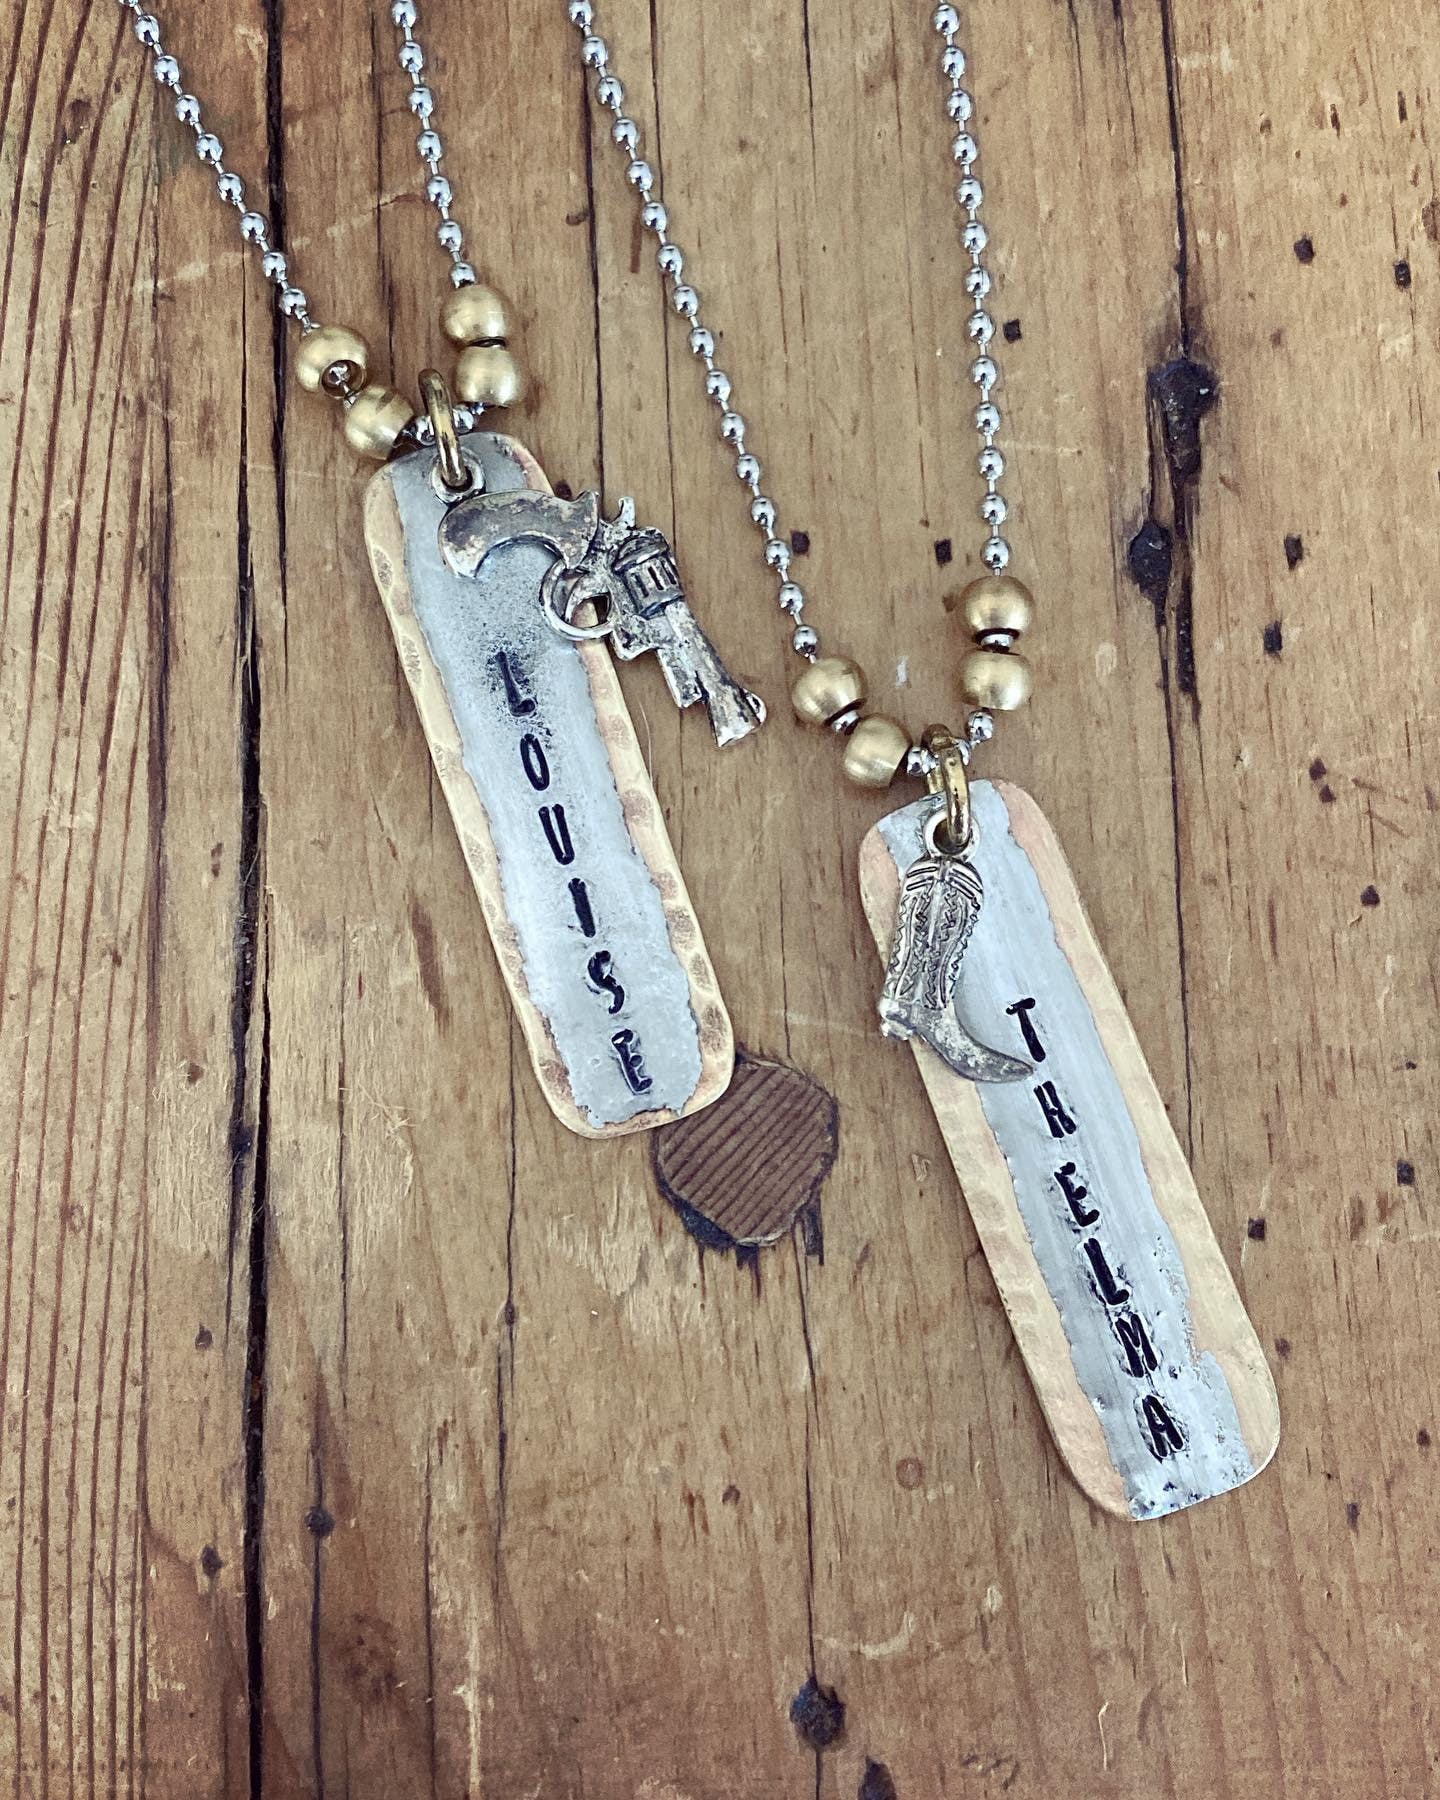 THELMA & LOUISE KEY NECKLACE - Junk GYpSy co.